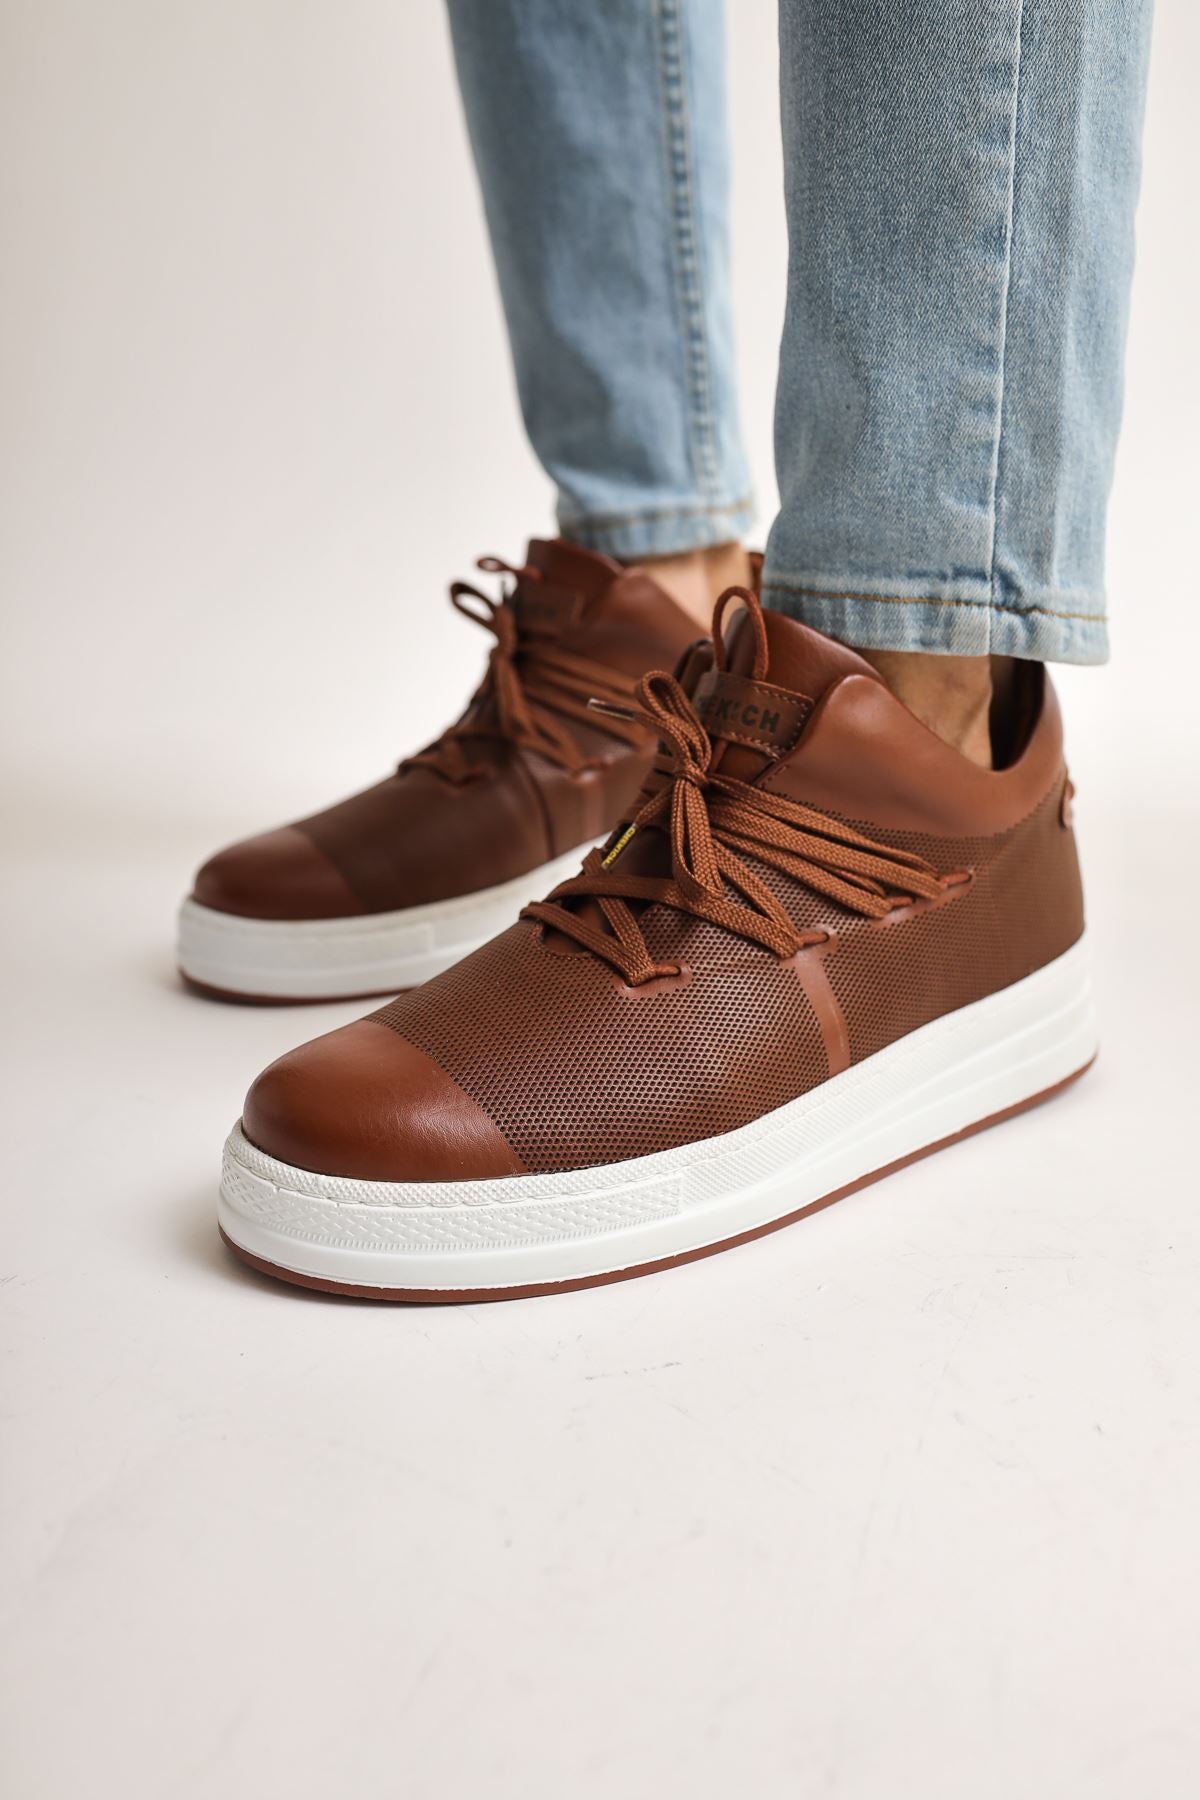 CH219 CBT Laser Men's sneakers Shoes Brown - STREETMODE™